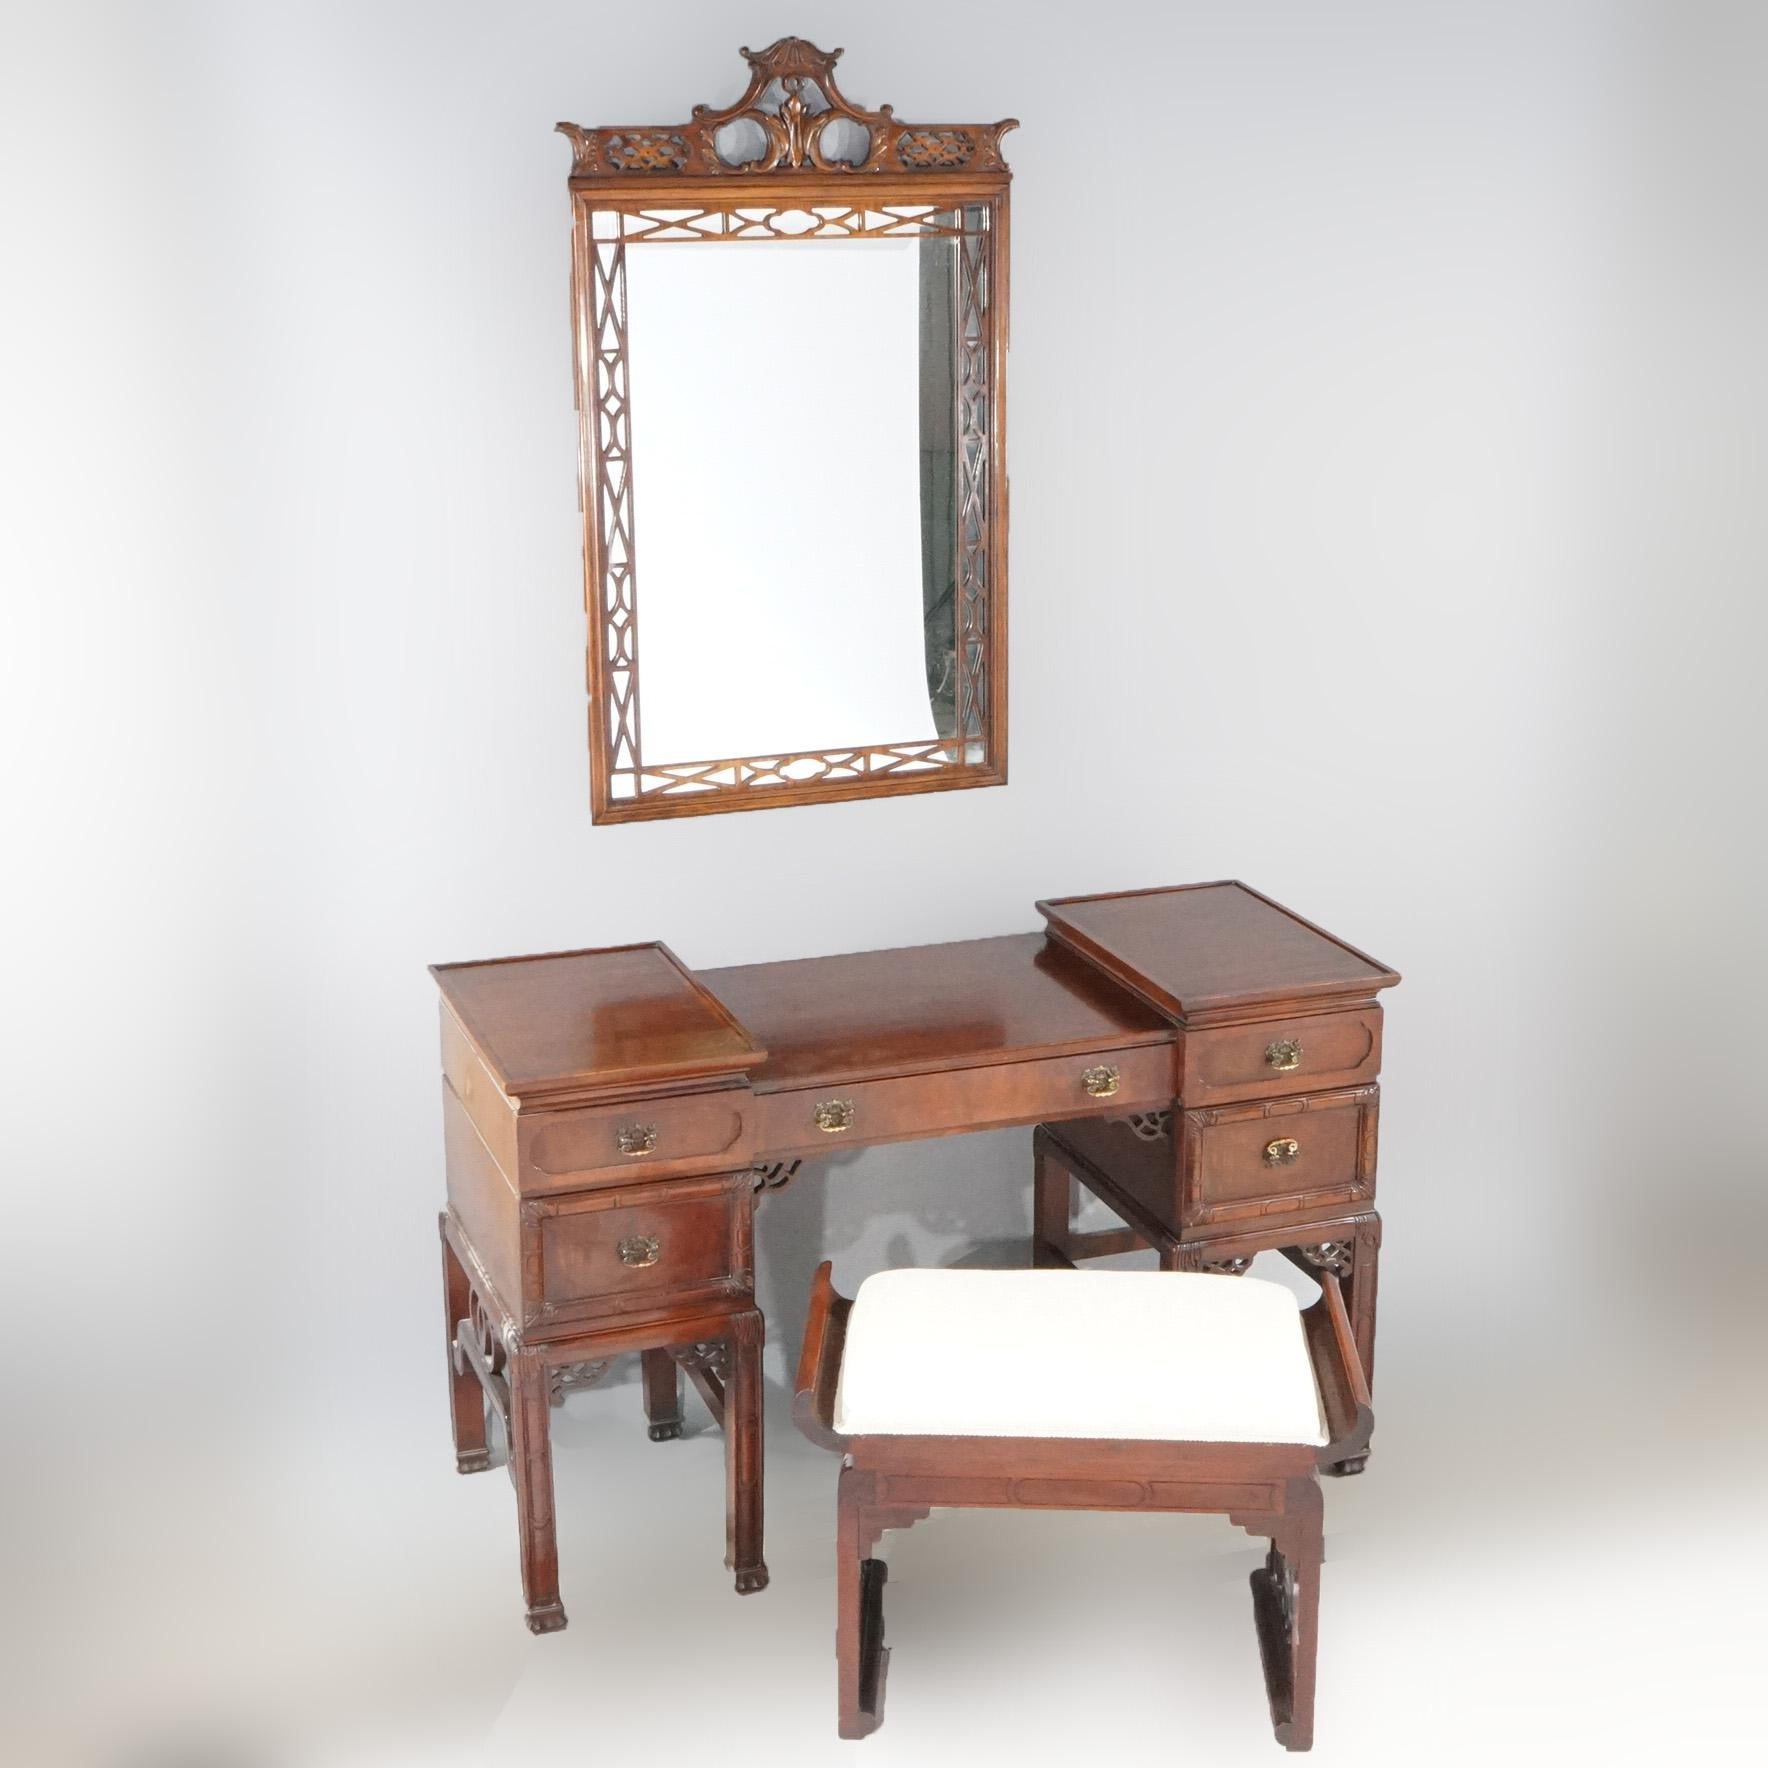 An antique Chinese Chippendale dressing set offers mahogany construction with dressing table, upholstered bench and wall mirror, c1940

Measures: Table 30.25''H x 49.5''W x 20''D;  Mirror 43.75''H x 27''W x 1.25'' D;  Bench 19''H x 26.5''W x